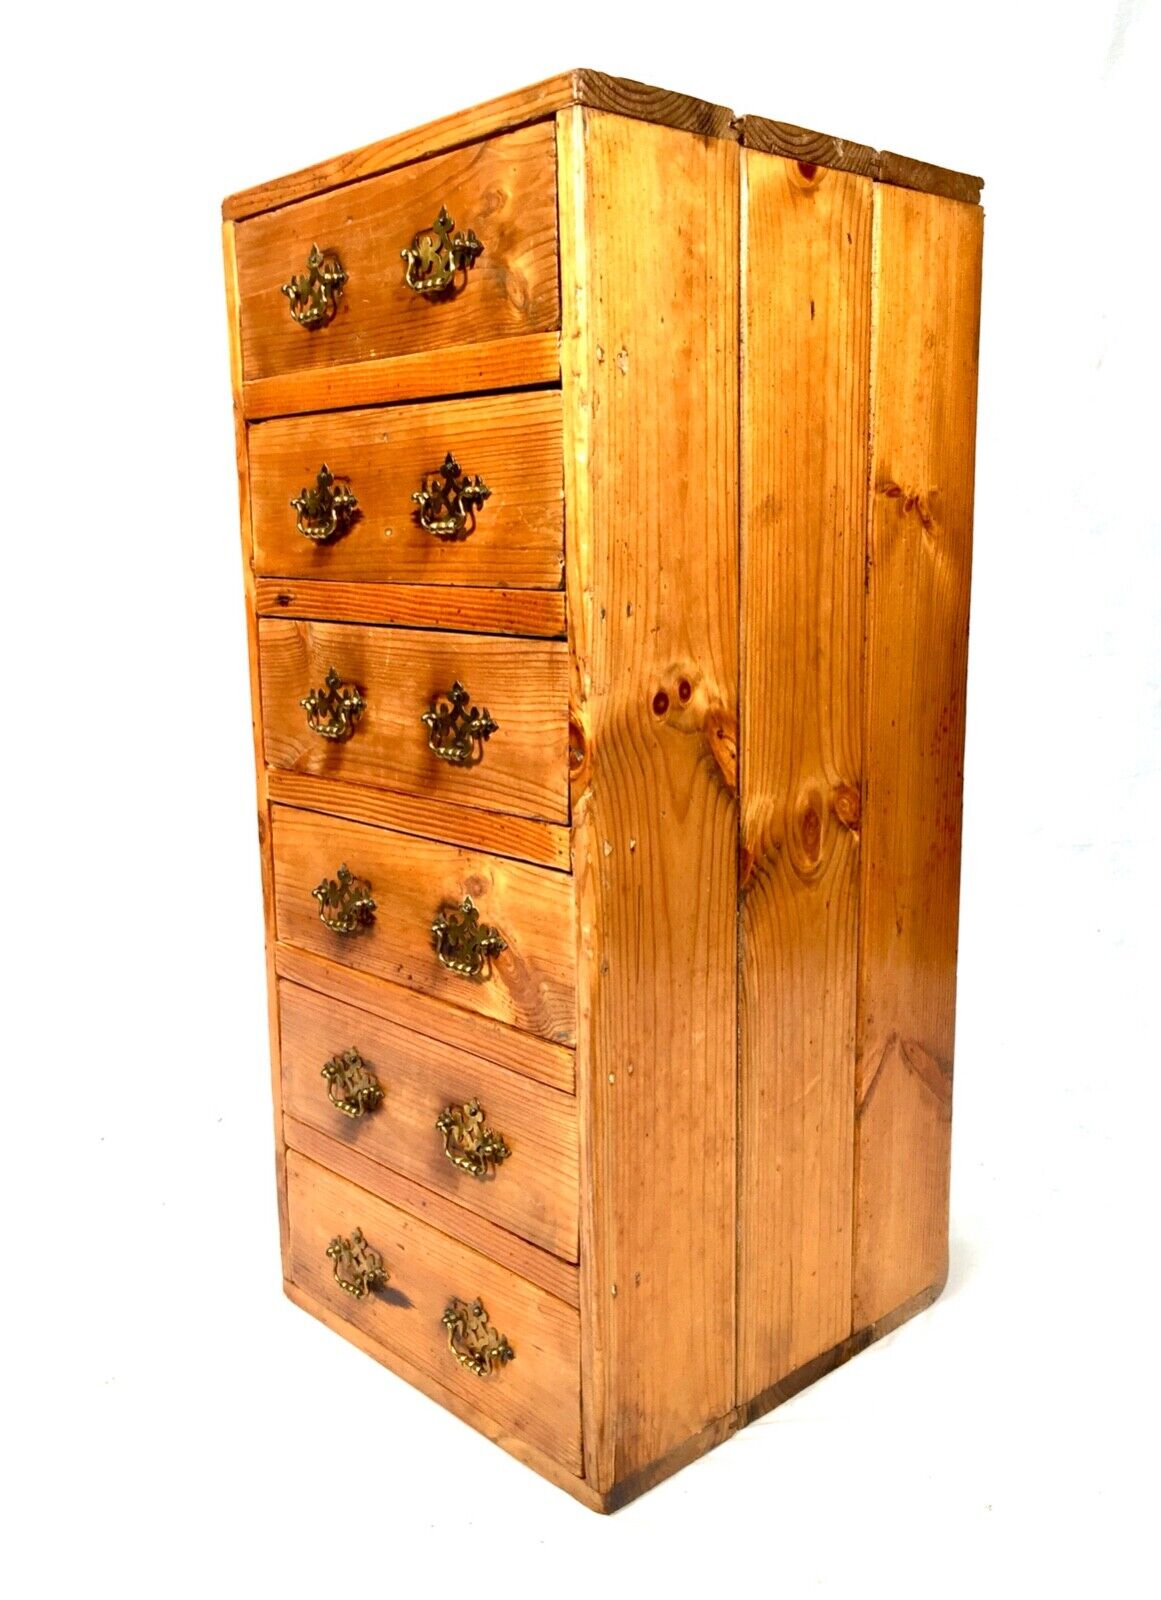 Antique Rustic Pine Tabletop or Floor Standing Filing Cabinet / Chest of Drawers